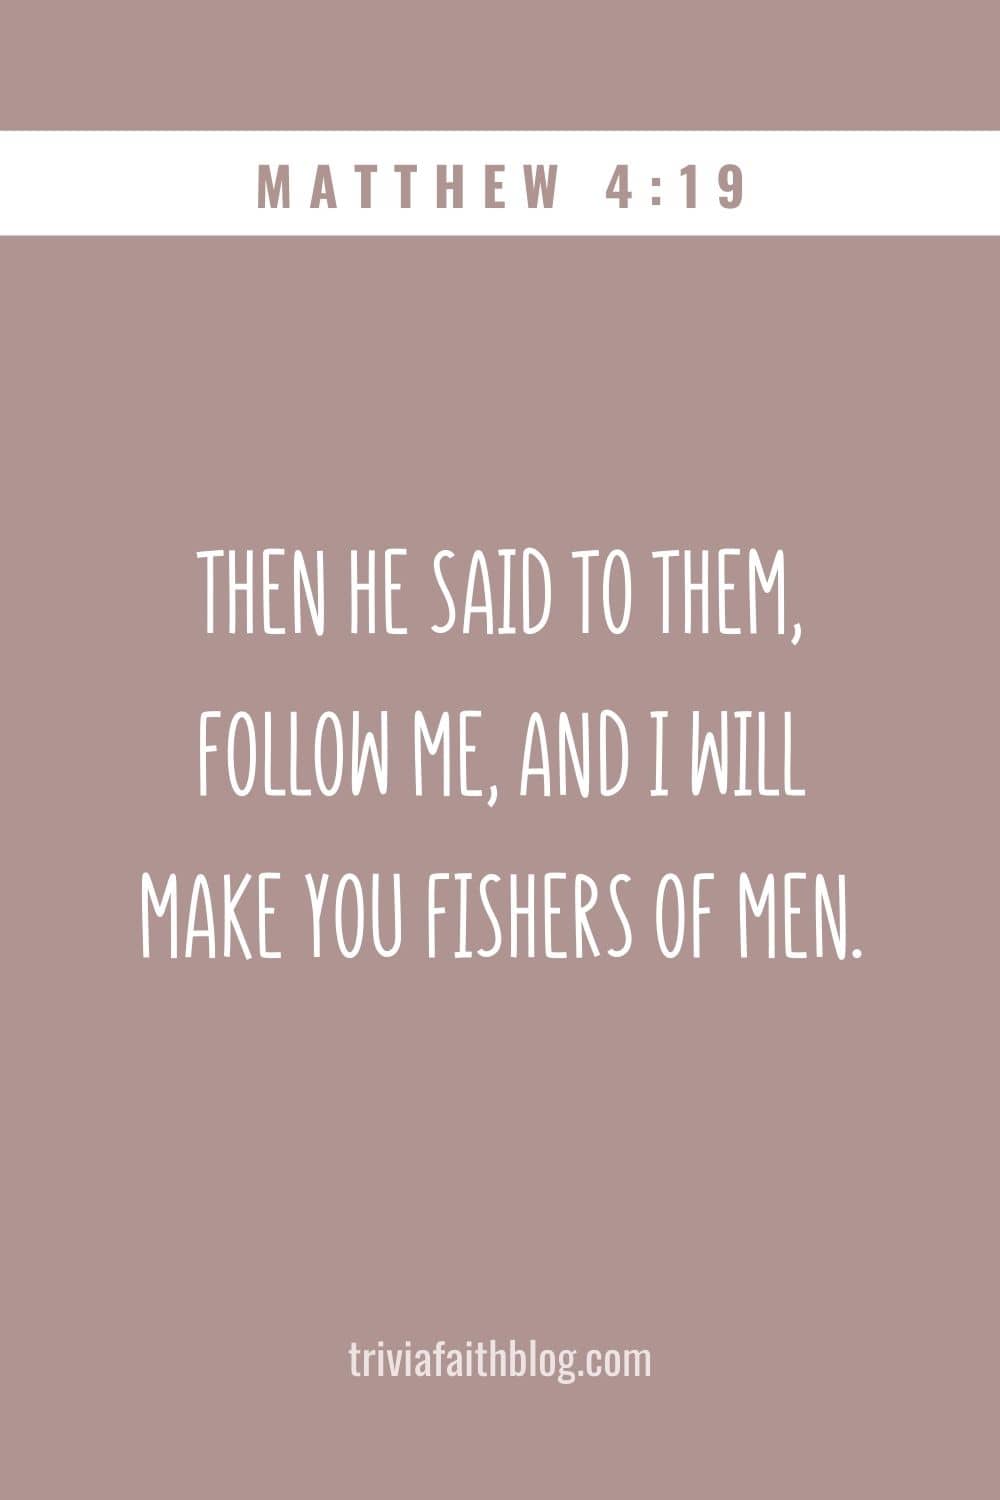 Follow Me, and I will make you fishers of men